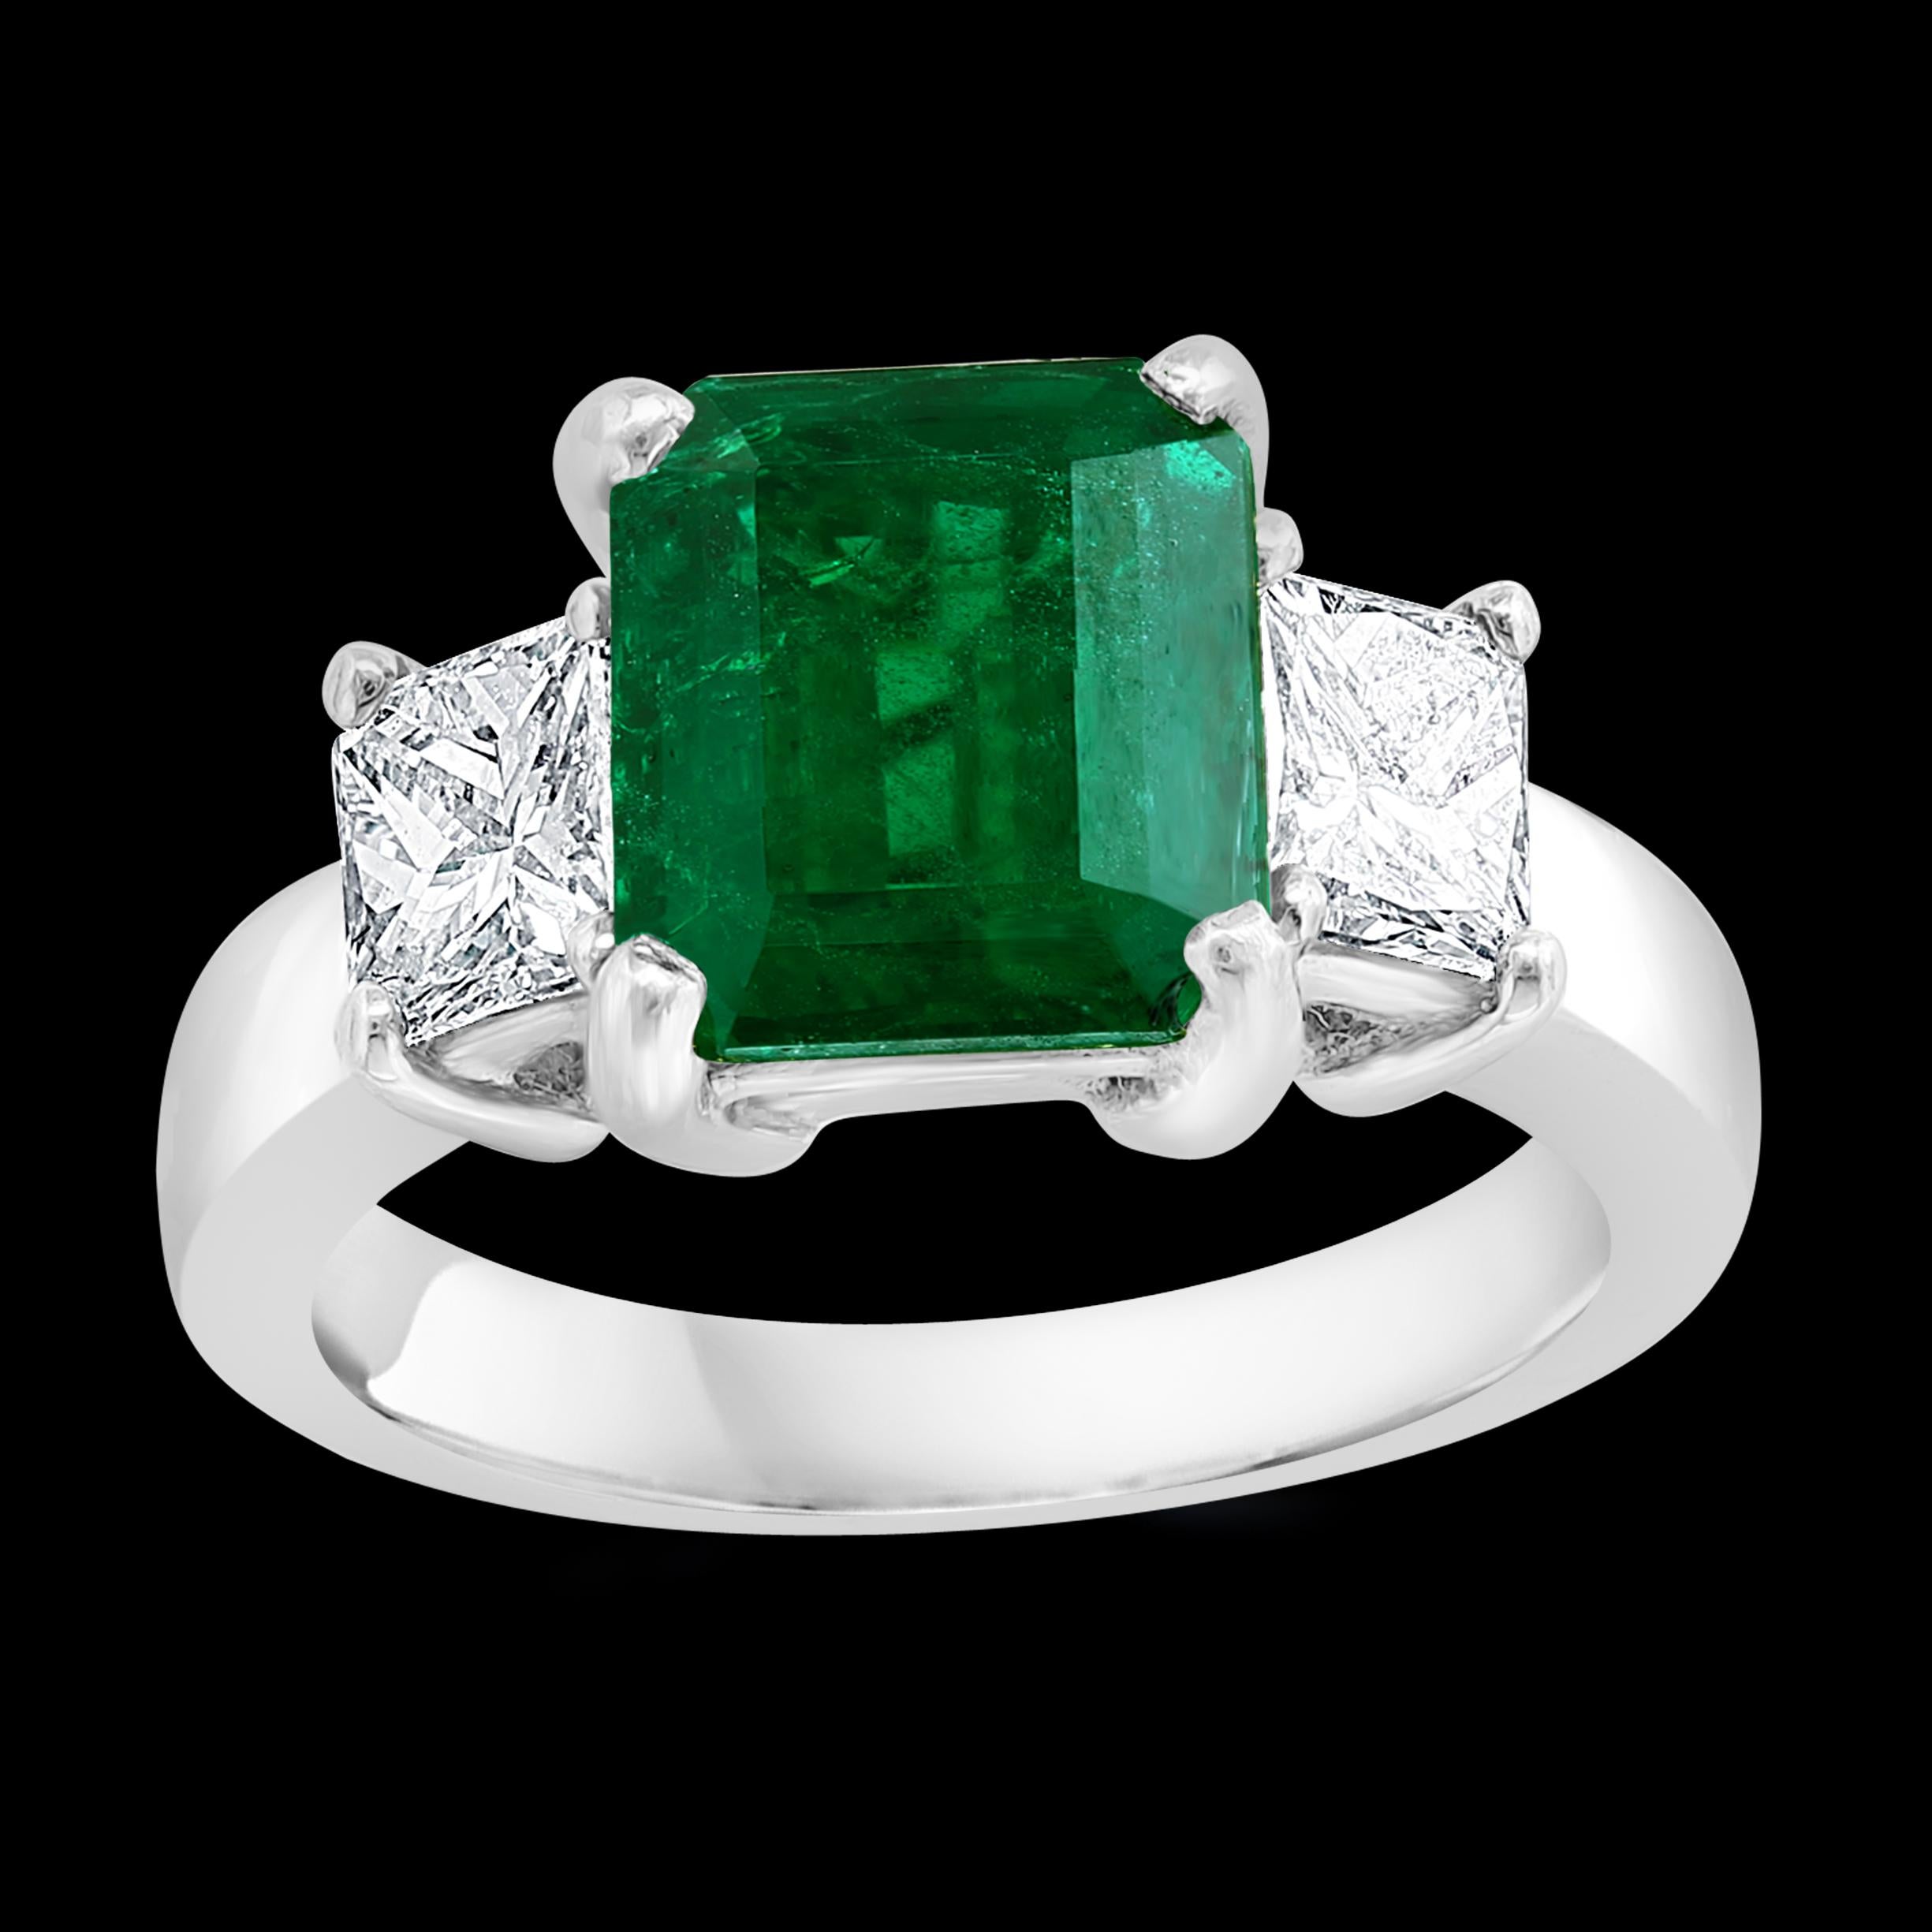 1.1 Carats Natural Emerald Diamond Ring in 18K Yellow Gold for Women 